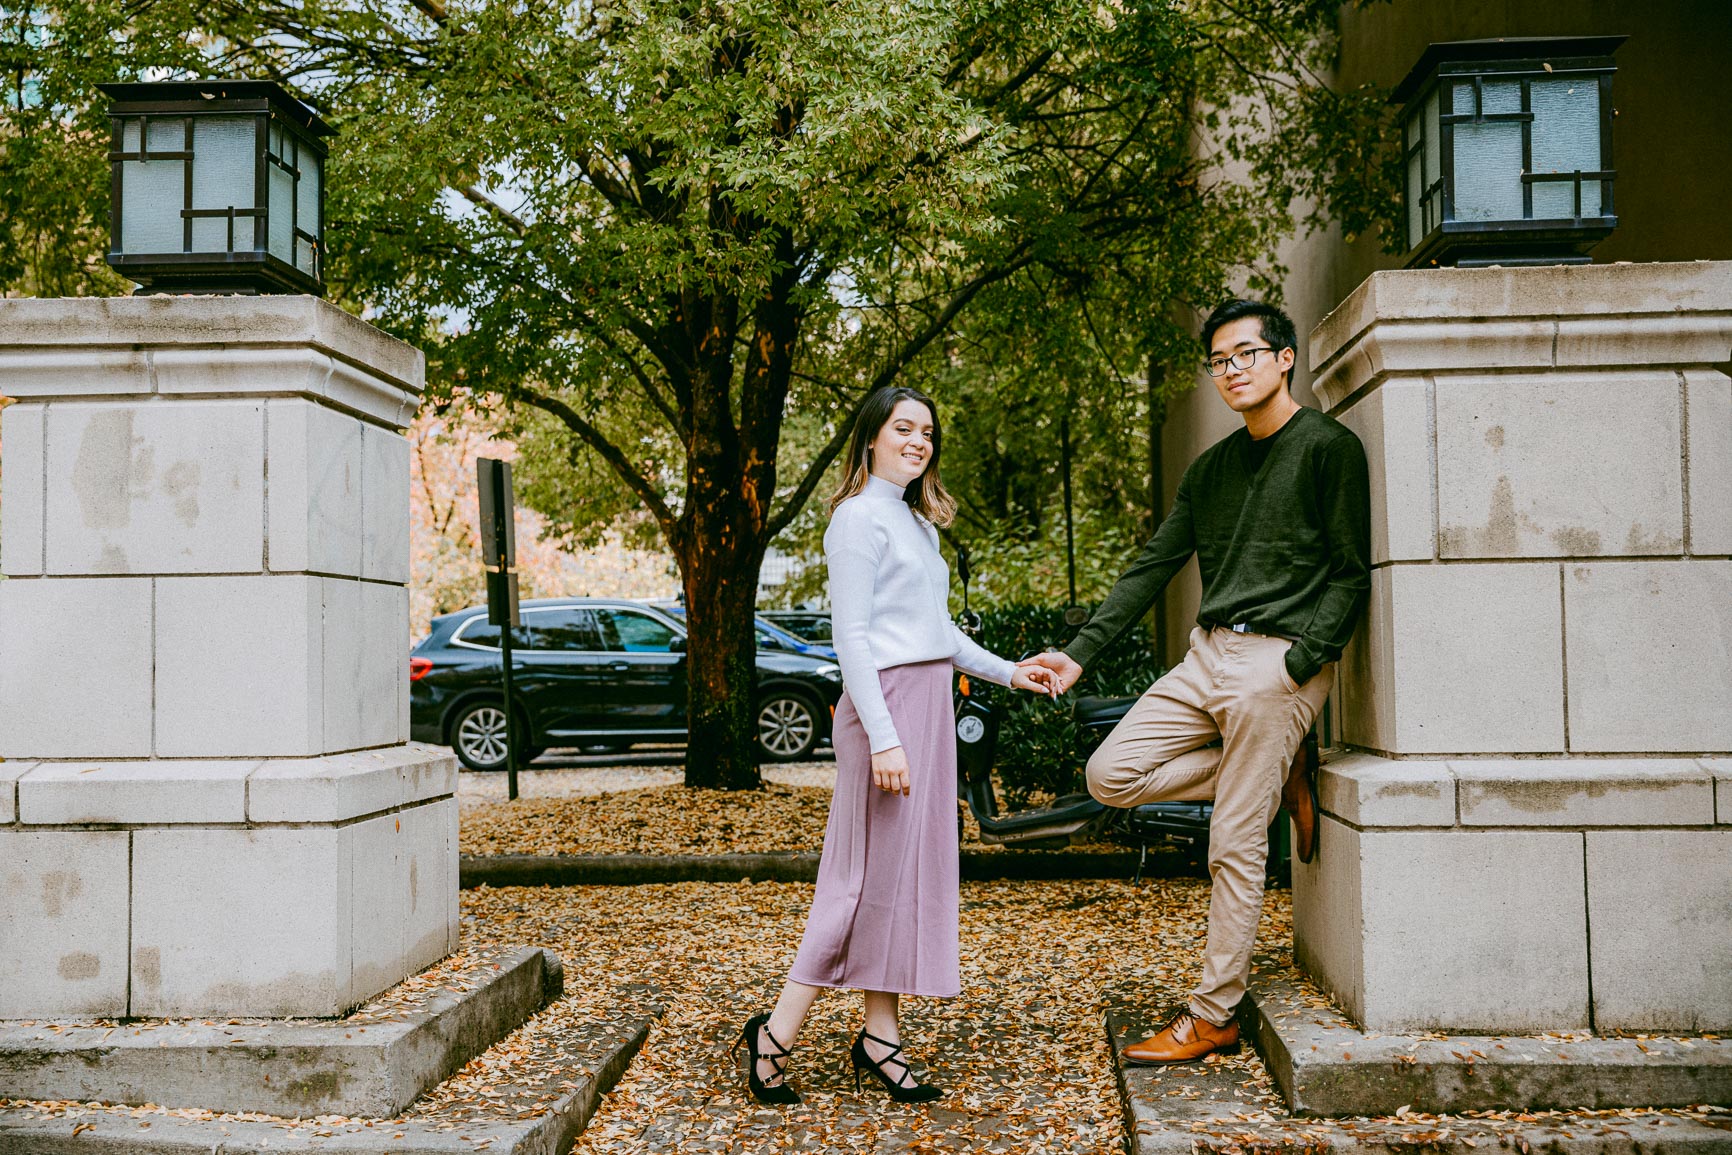 fall engagement photo in downtown asheville nc shot by Nhieu Tang Photography